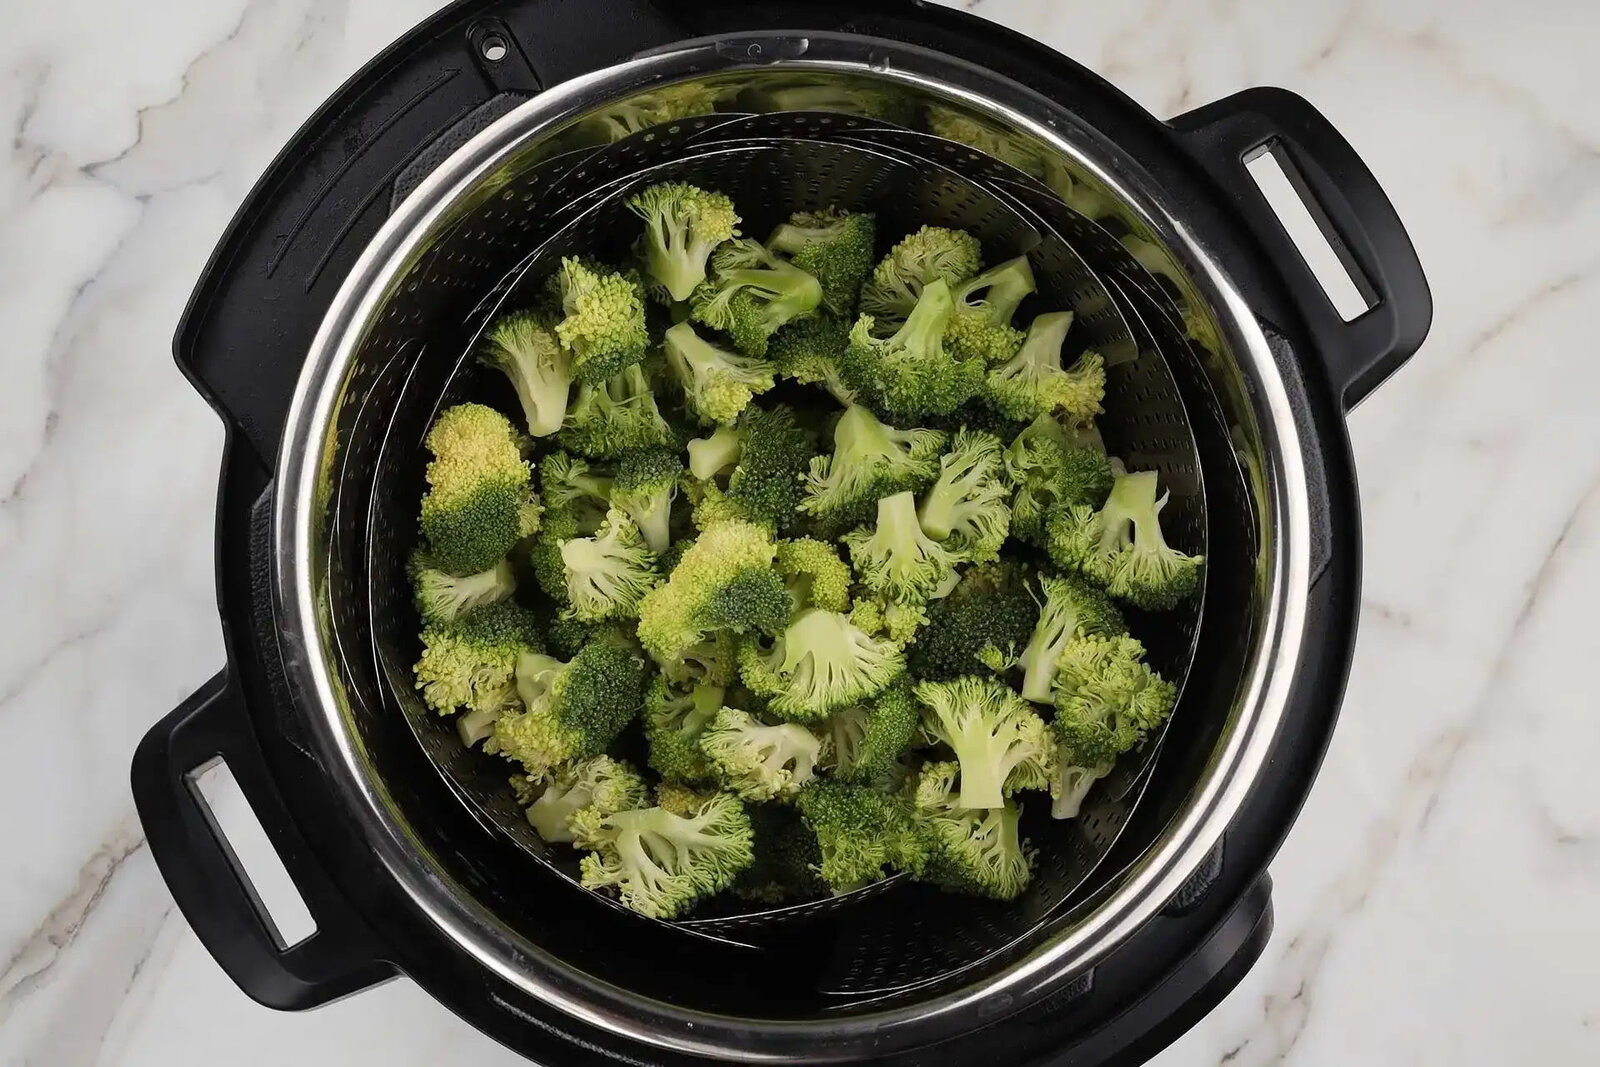 How To Cook Broccoli In Electric Pressure Cooker